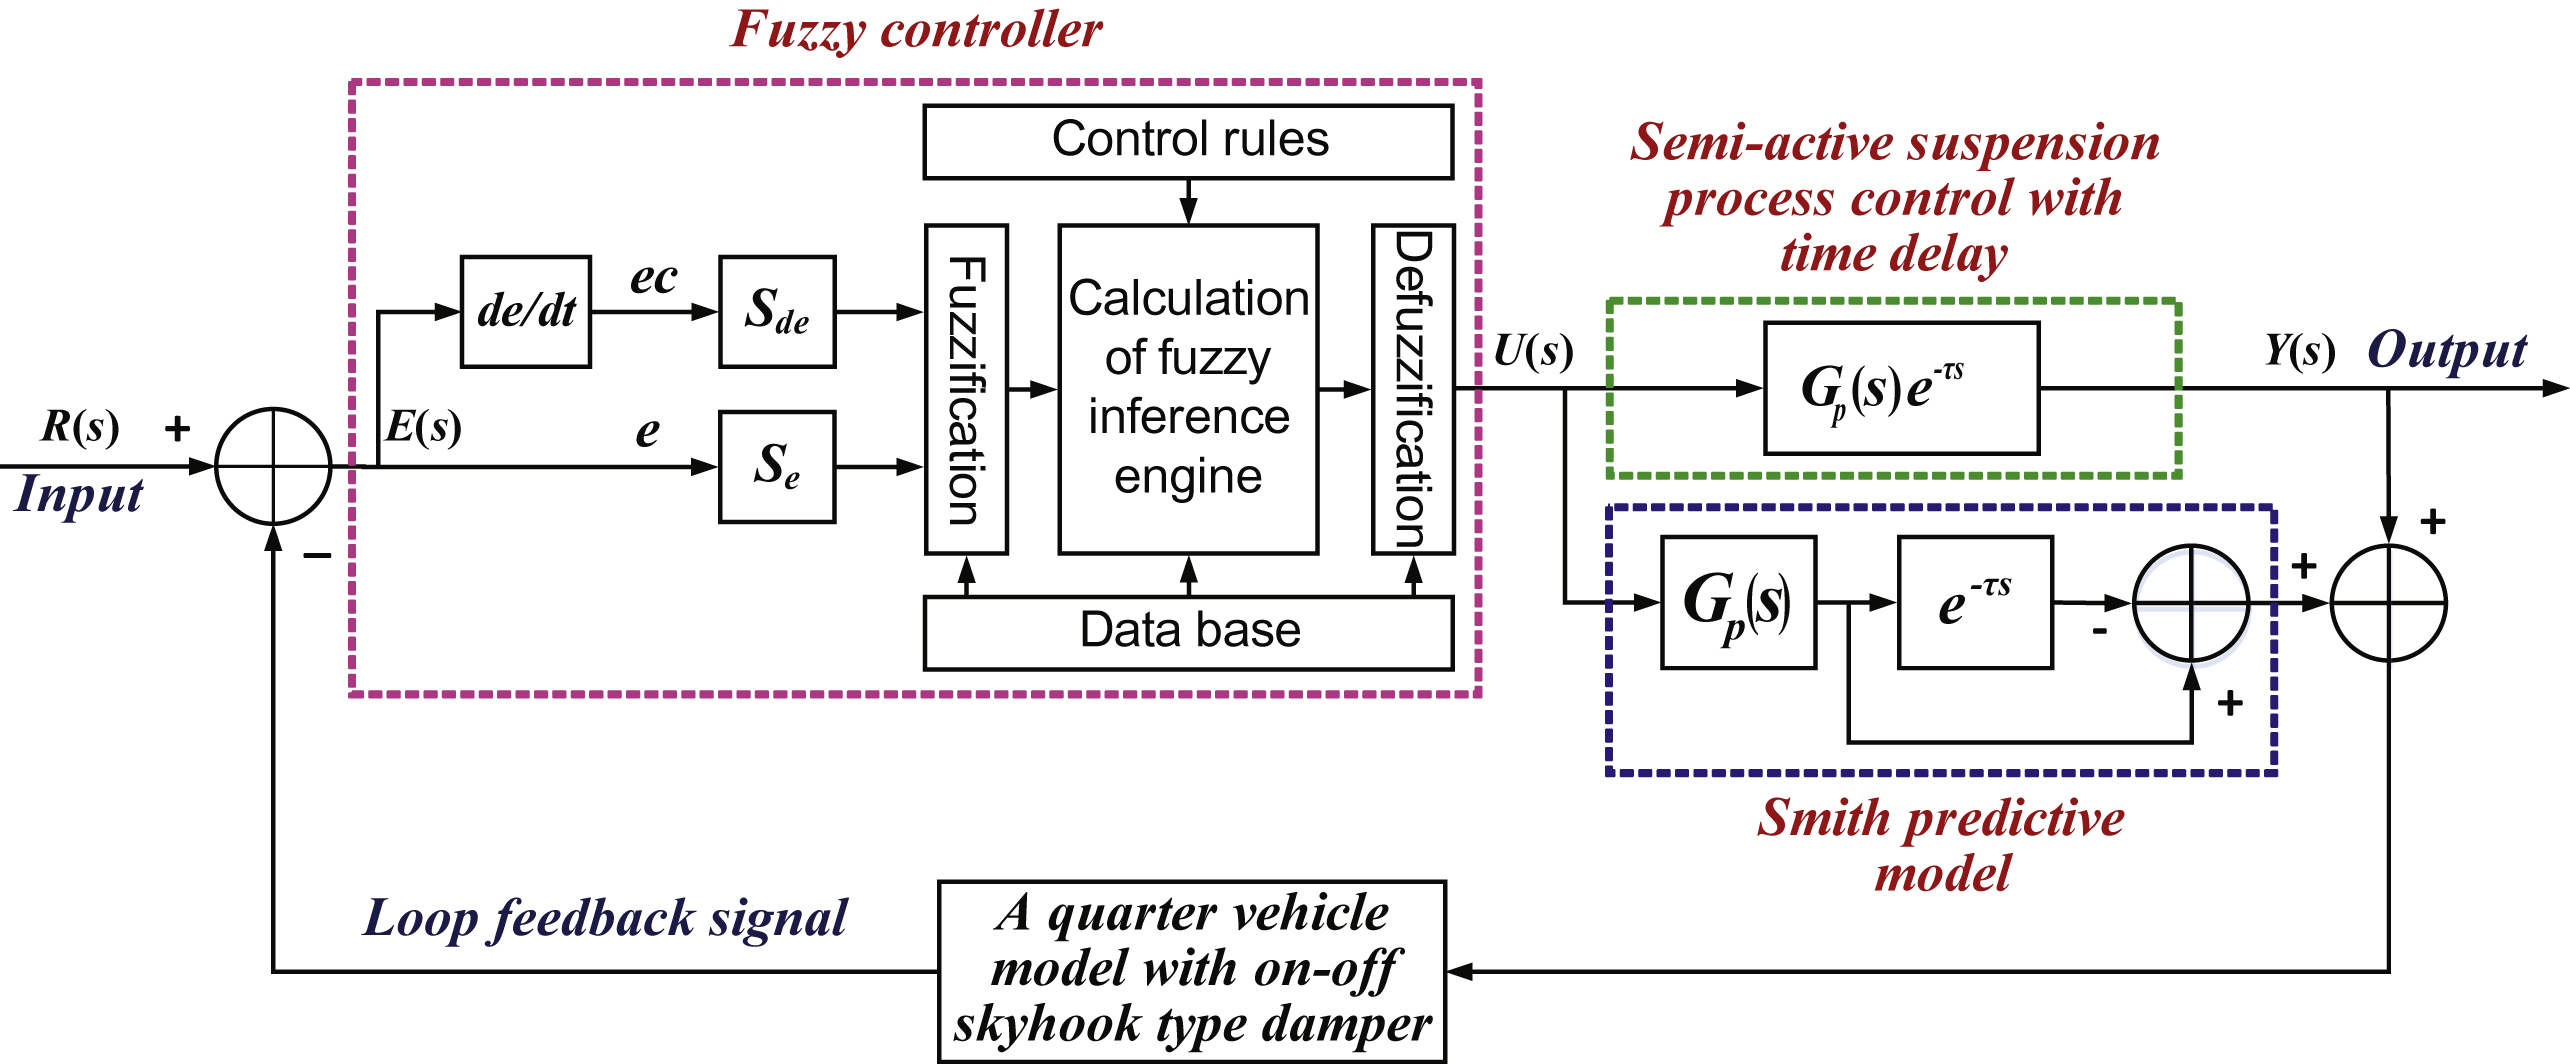 System structure of the Fuzzy-Smith predictive controller with time delay.